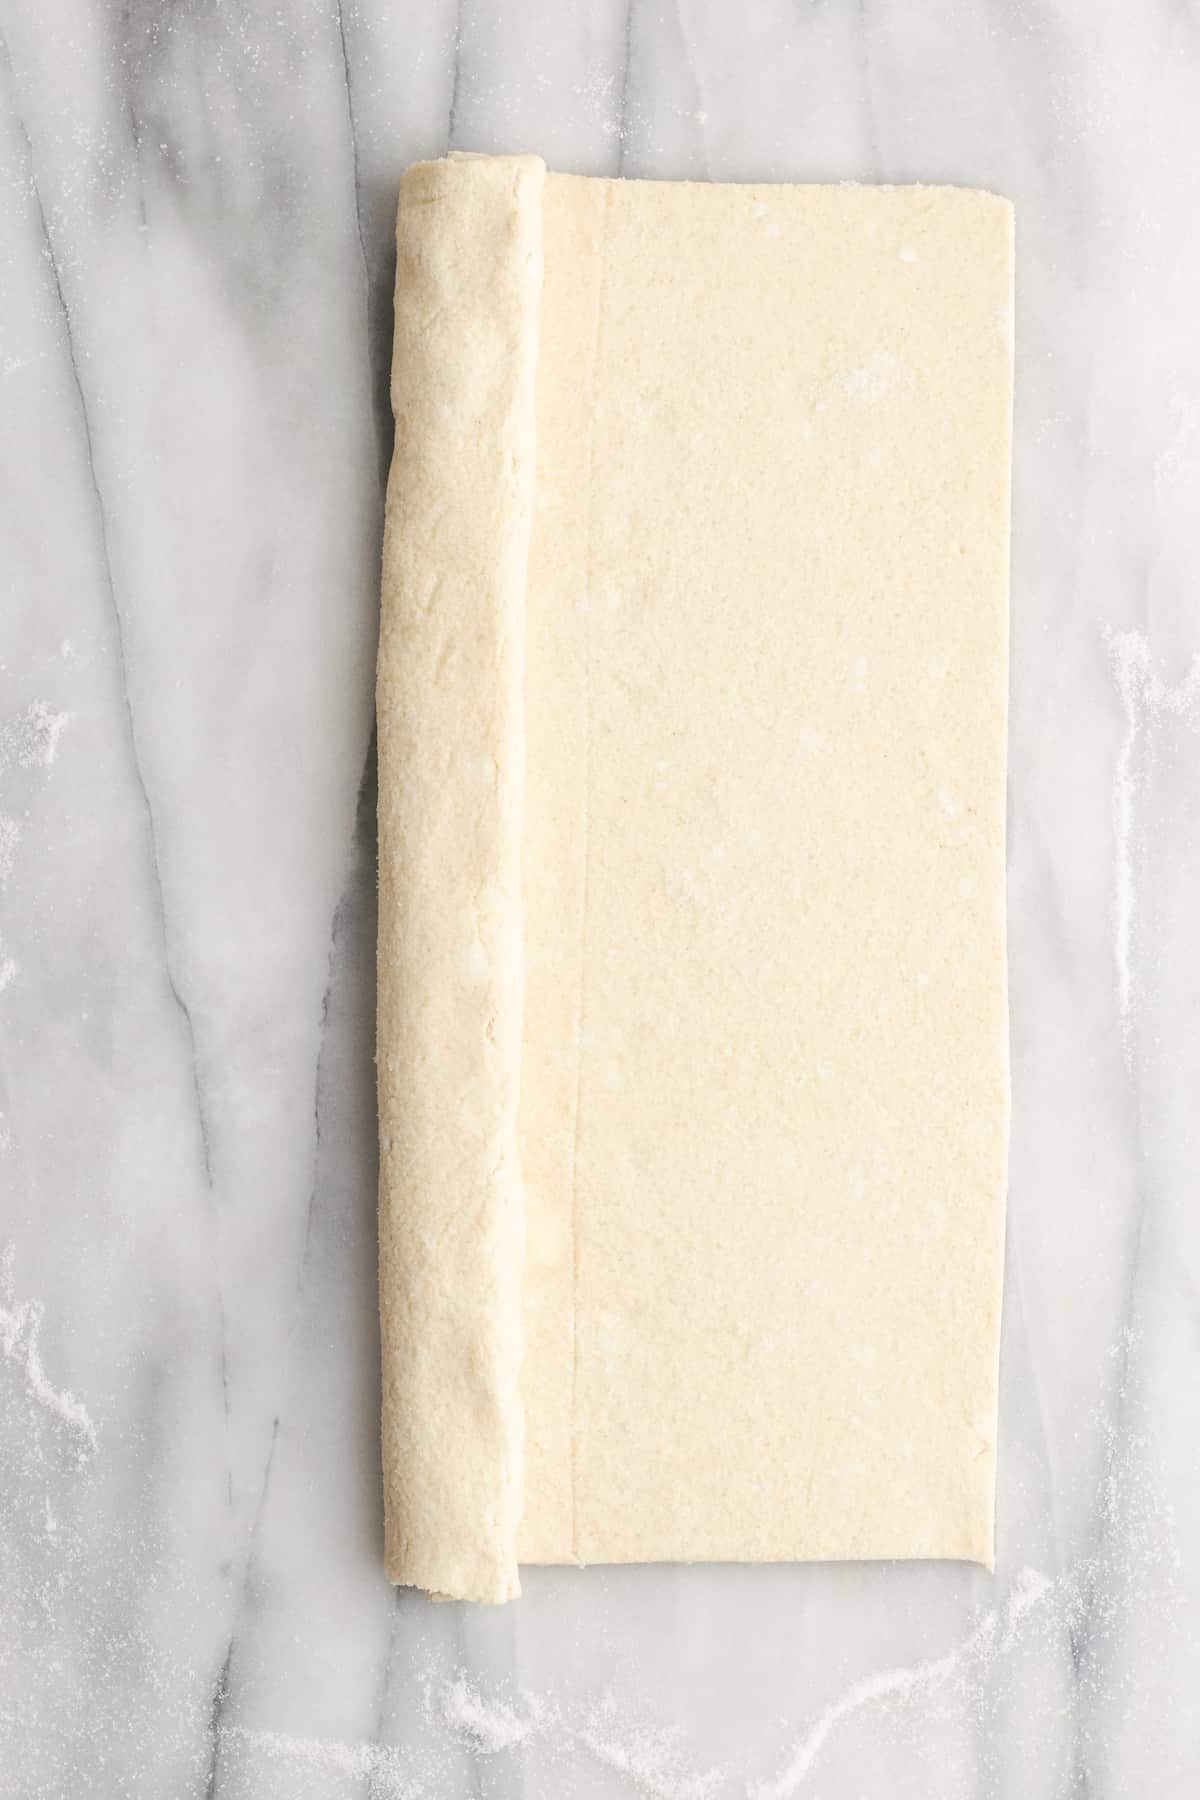 A rectangle of puff pastry with one side folded in towards the middle half way, and the other side not folded